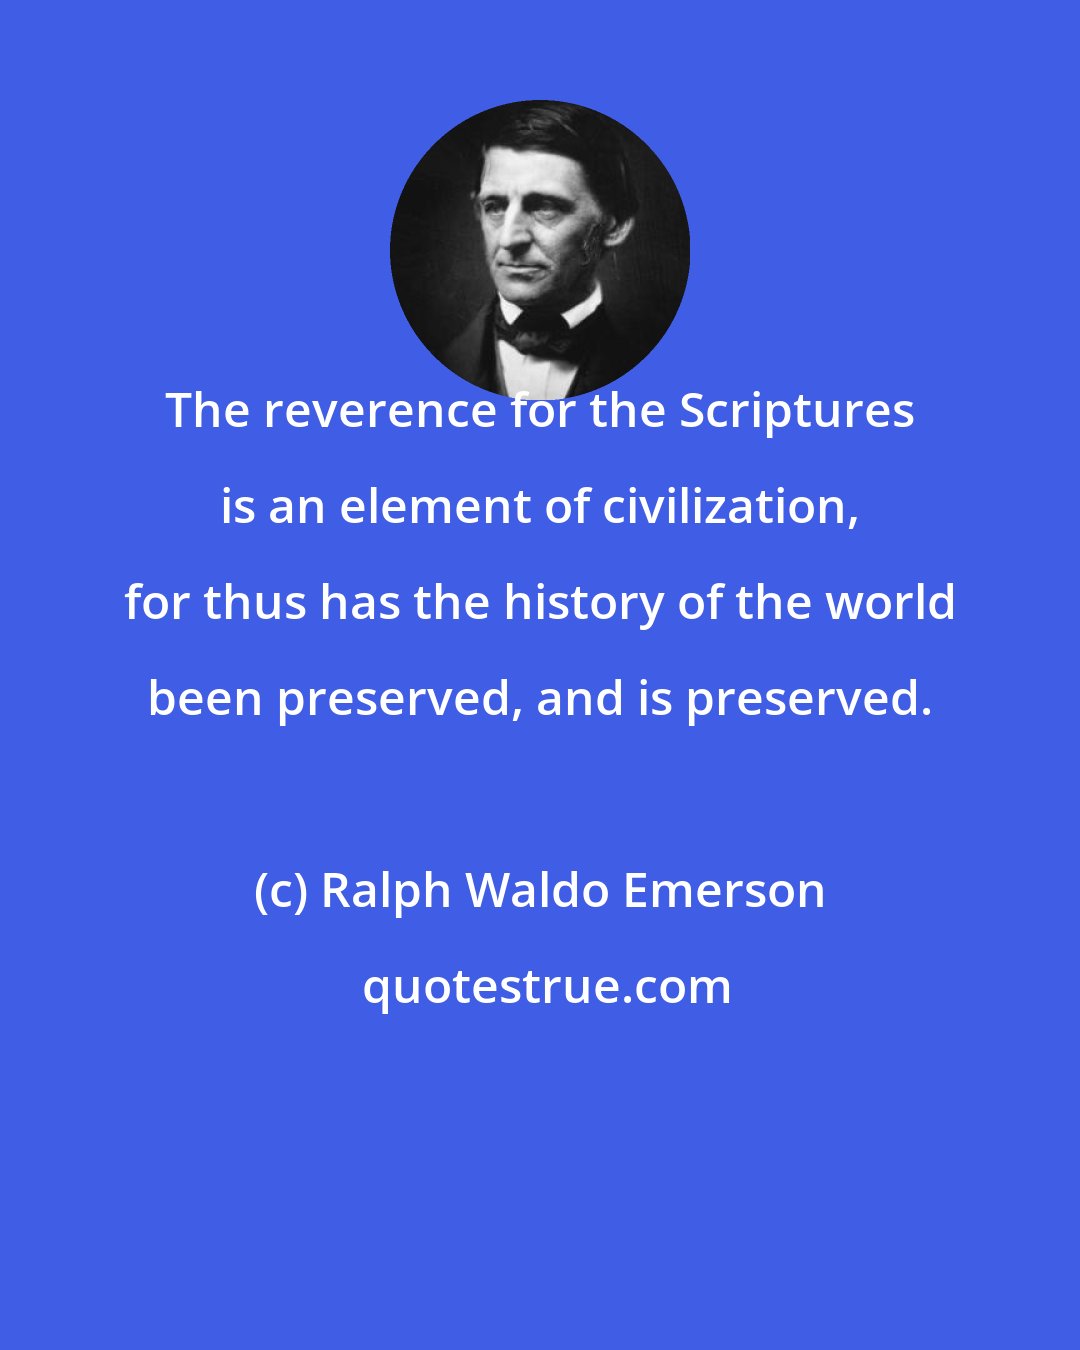 Ralph Waldo Emerson: The reverence for the Scriptures is an element of civilization, for thus has the history of the world been preserved, and is preserved.